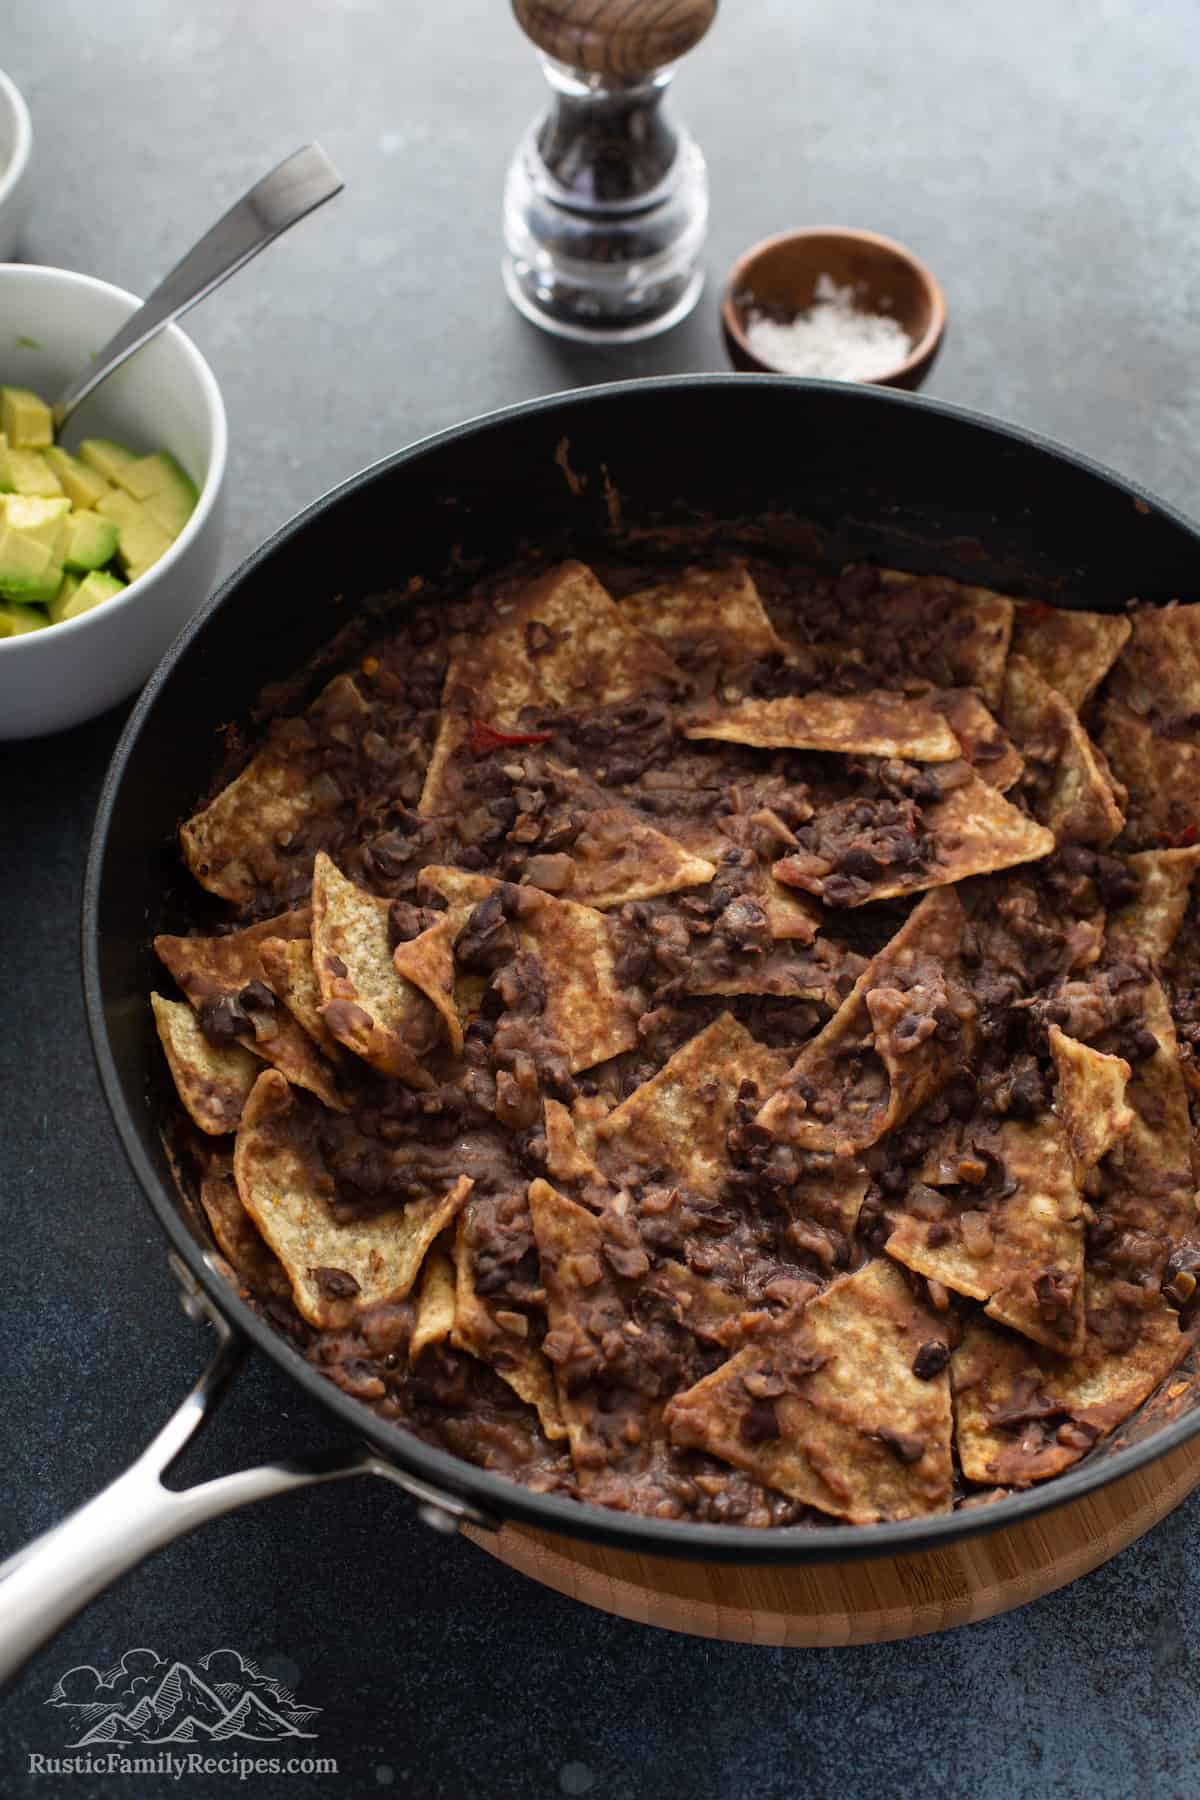 Tortilla chips mixed in with mashed black beans in a pan